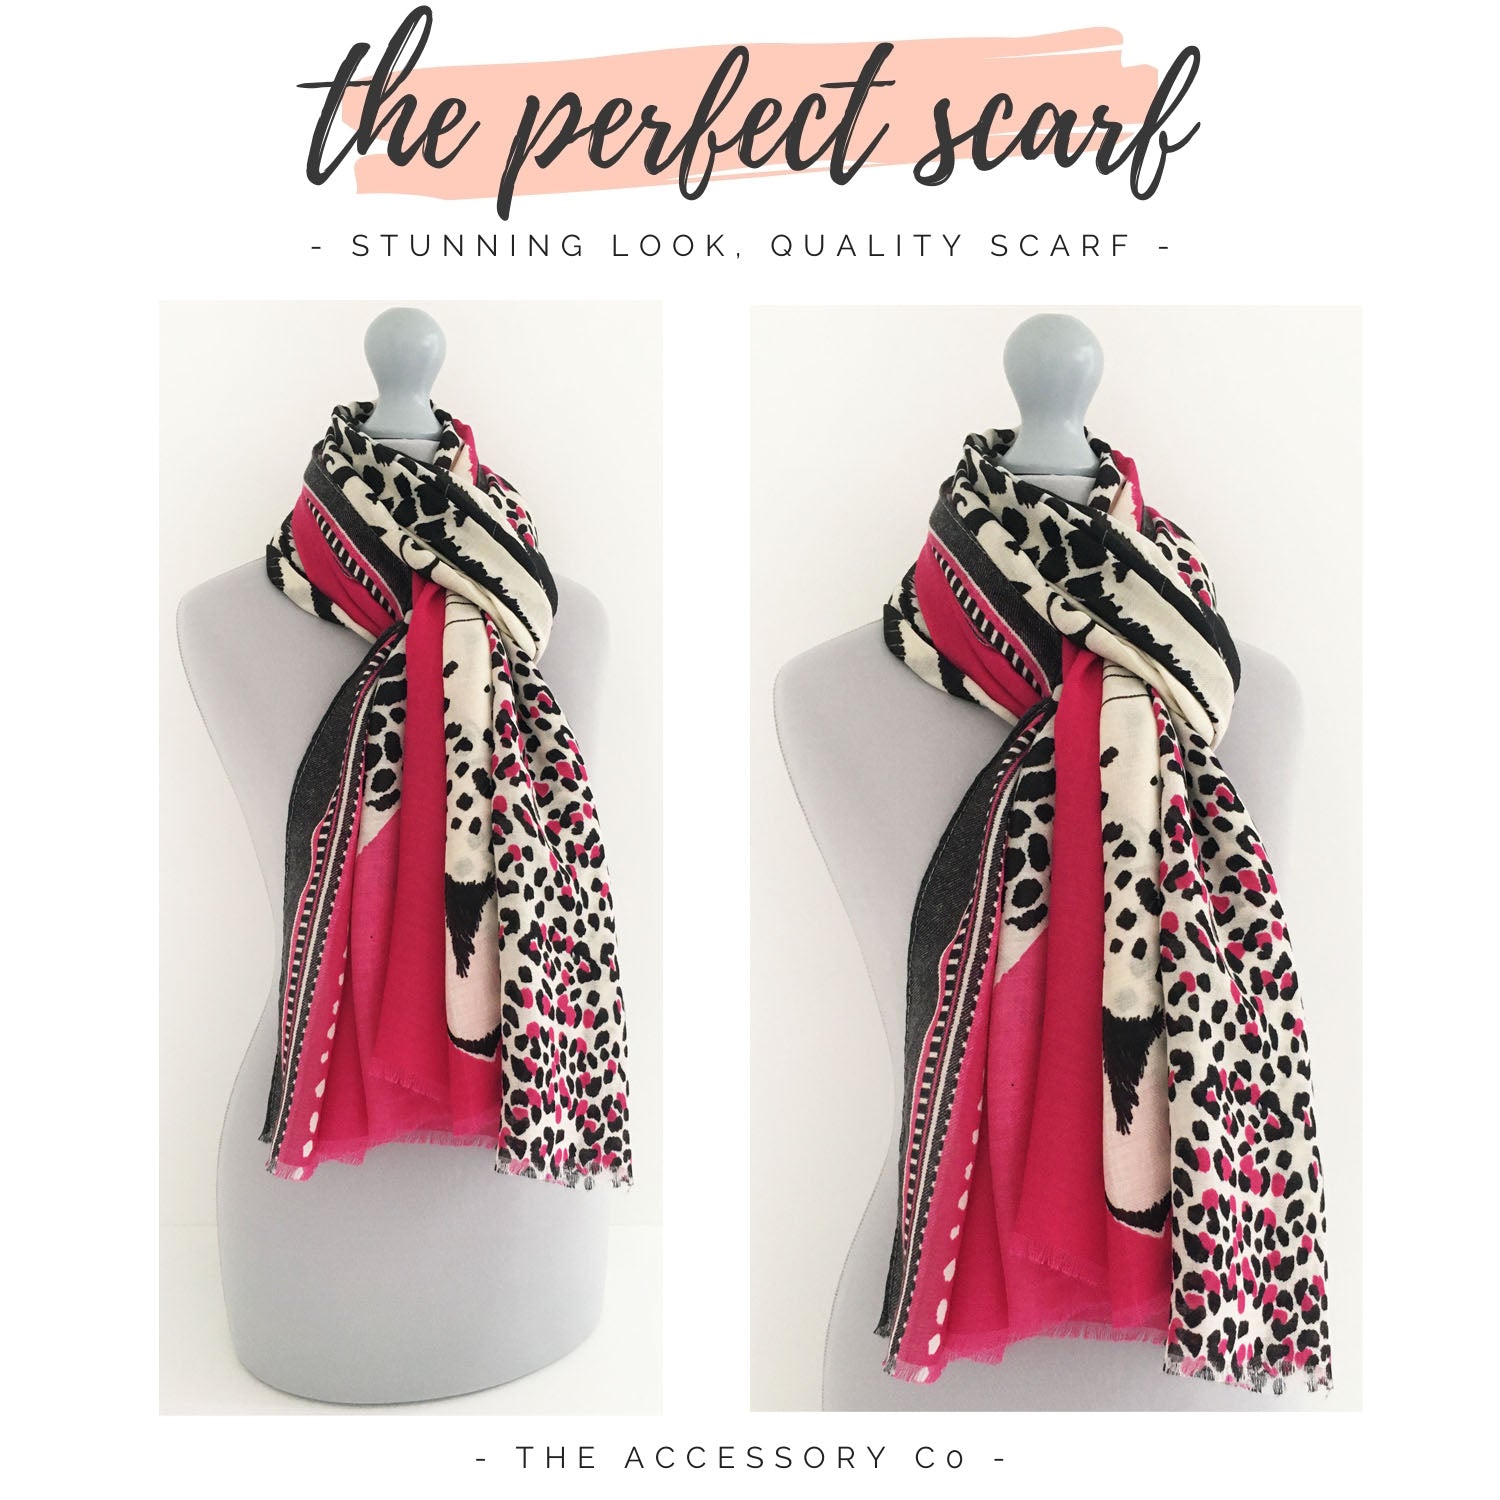 LARGE FUSCHIA PINK COTTON MIX TIGER AND LEOPARD PRINT SHAWL SCARF